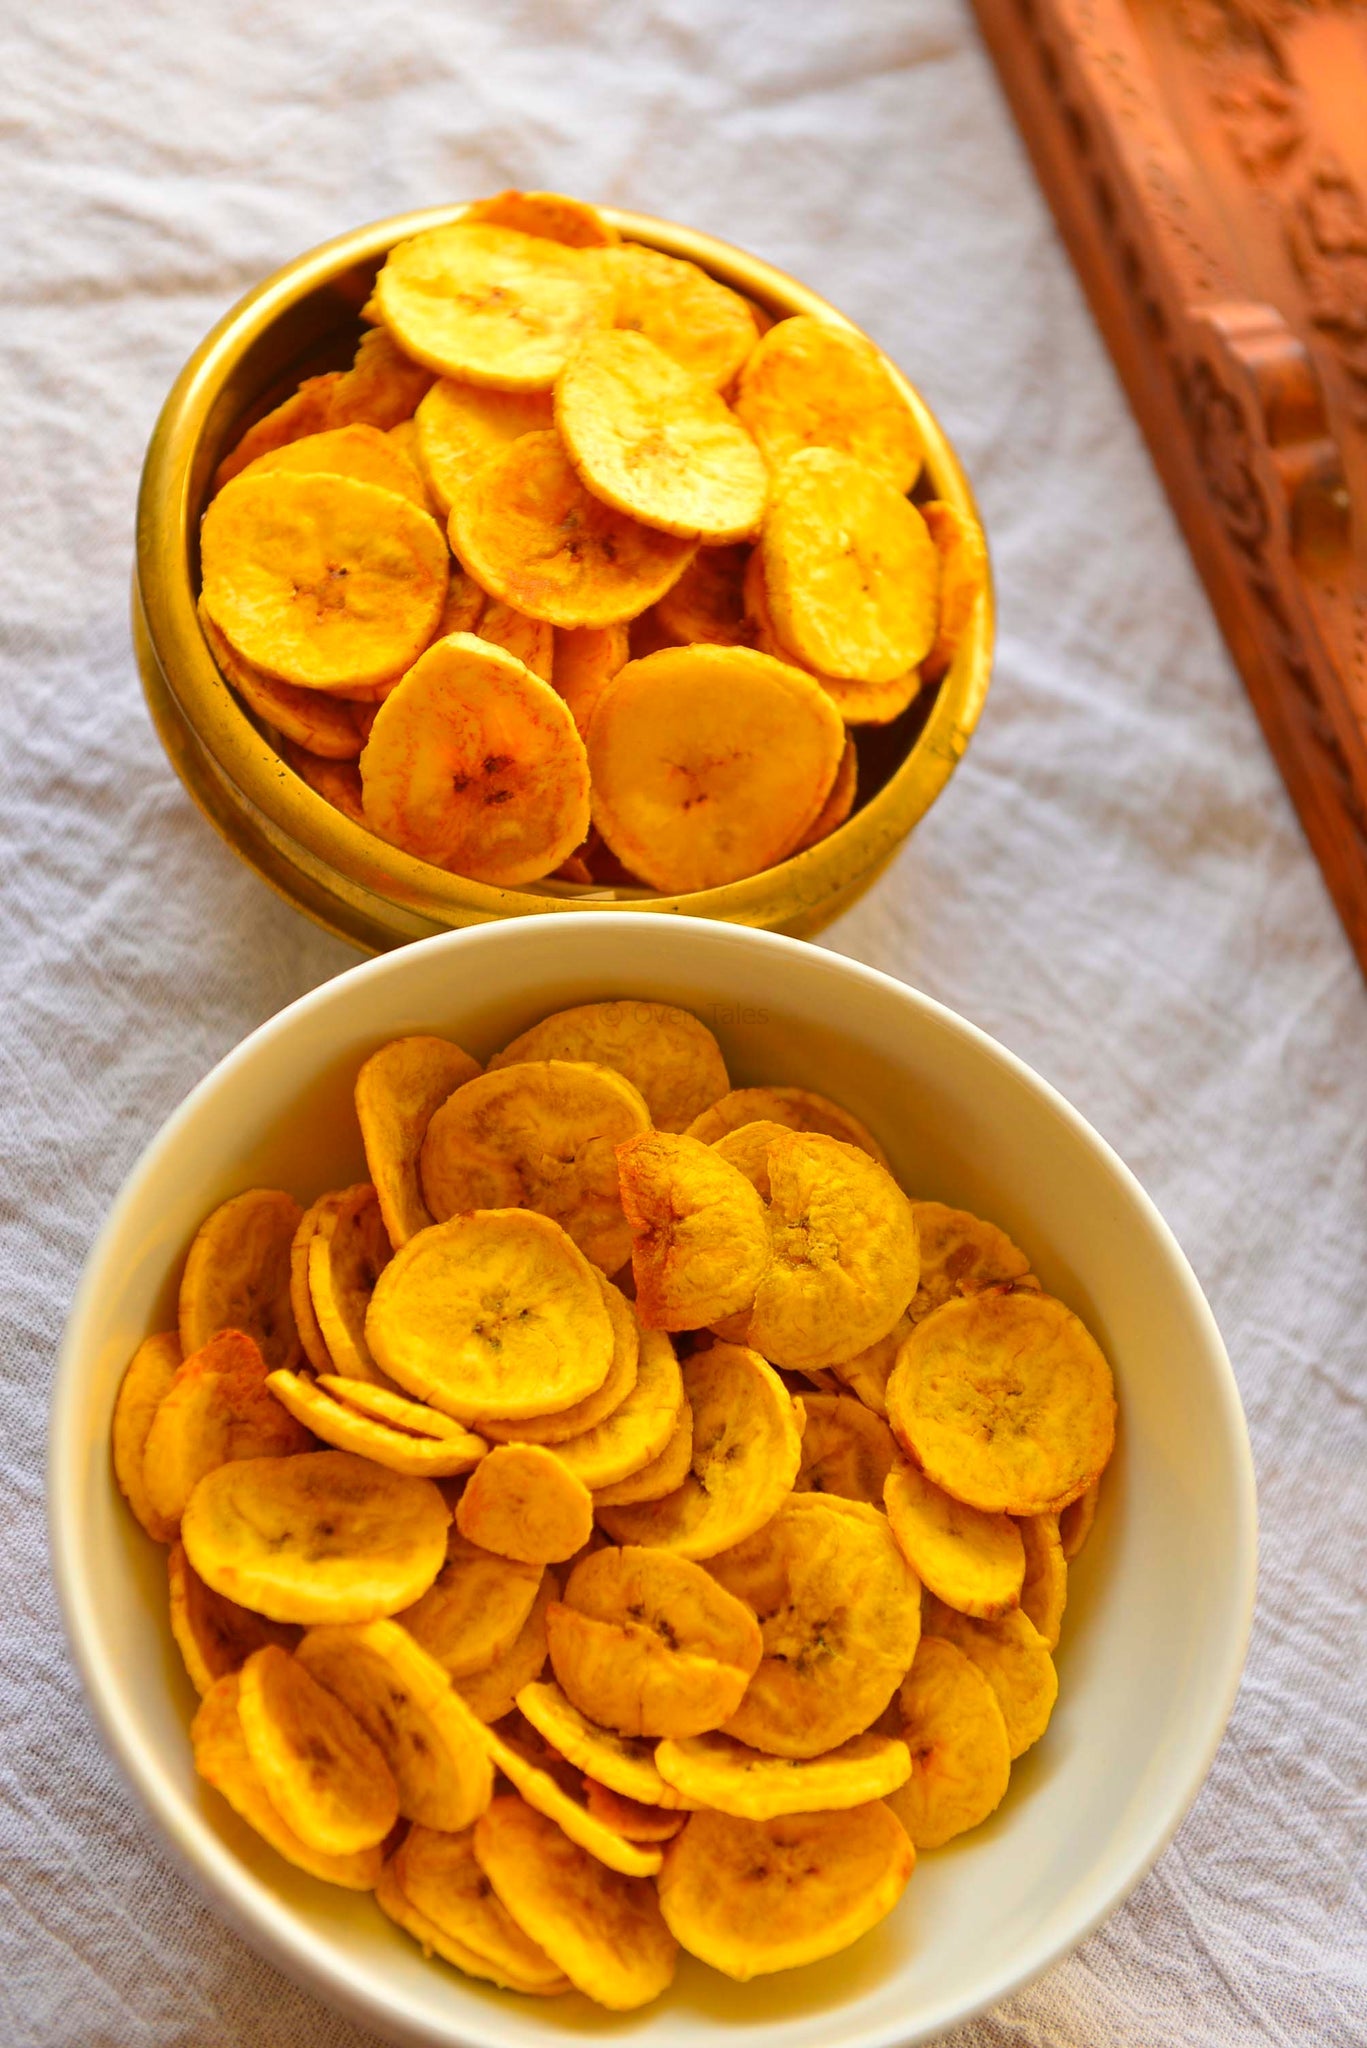 Plantain chips, crispy, and salty banana chips for dipping and parties, family size jar 22.93oz 650g